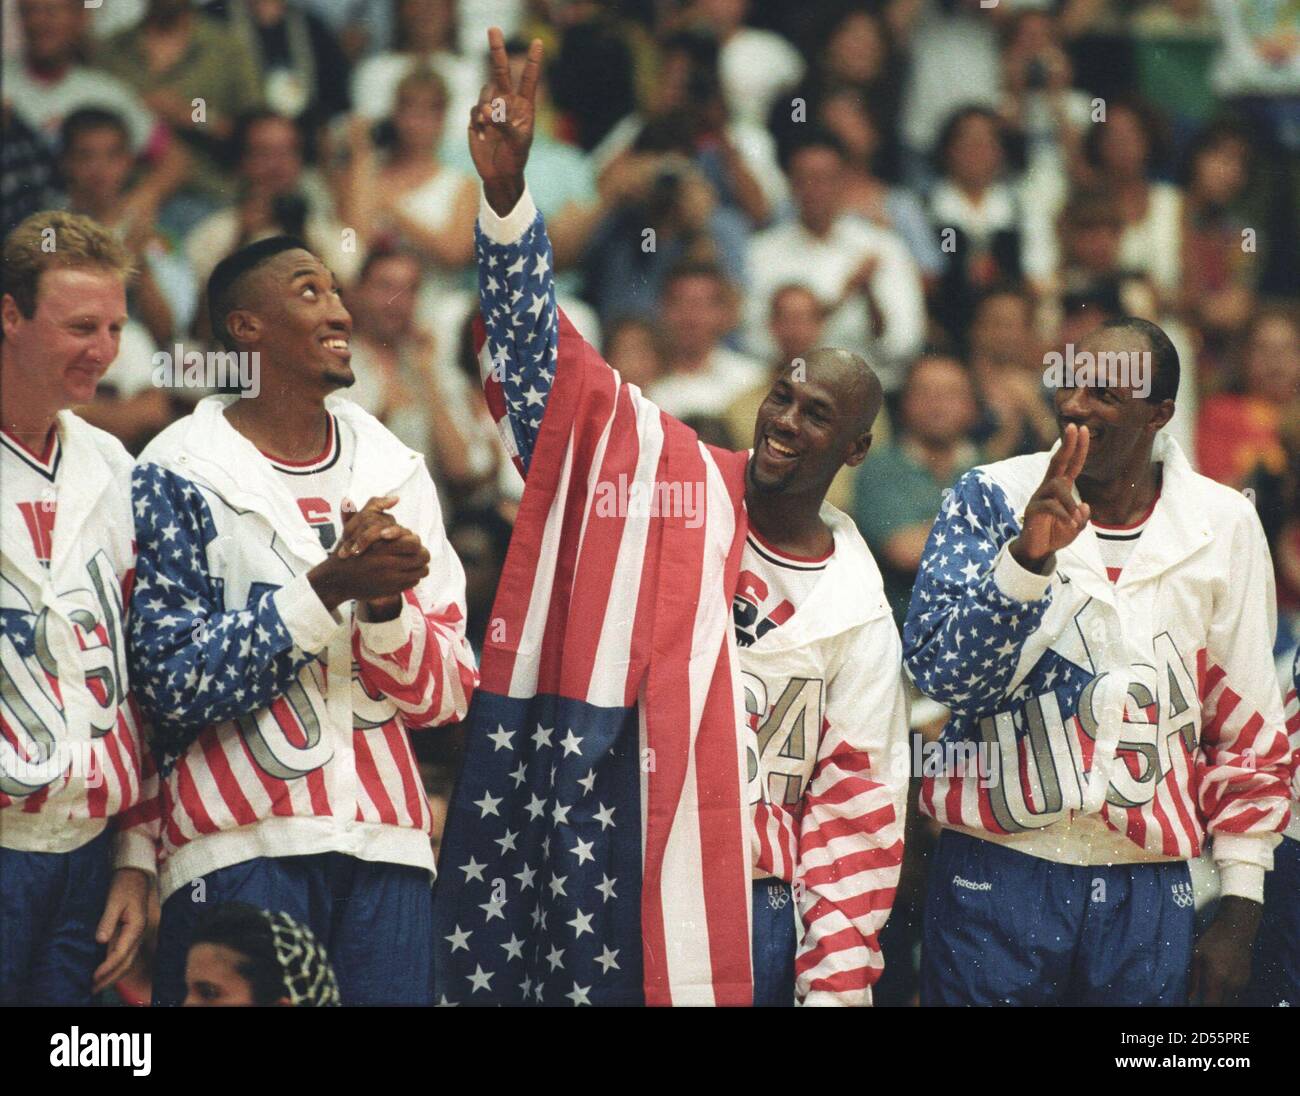 Hals Antagelse pelleten Michael Jordan uses a flag to cover up the Reebok logo on his USA uniform  as he stands with L-R: Larry Bird, Scottie Pippen and Clyde Drexler before  the gold medal presentation